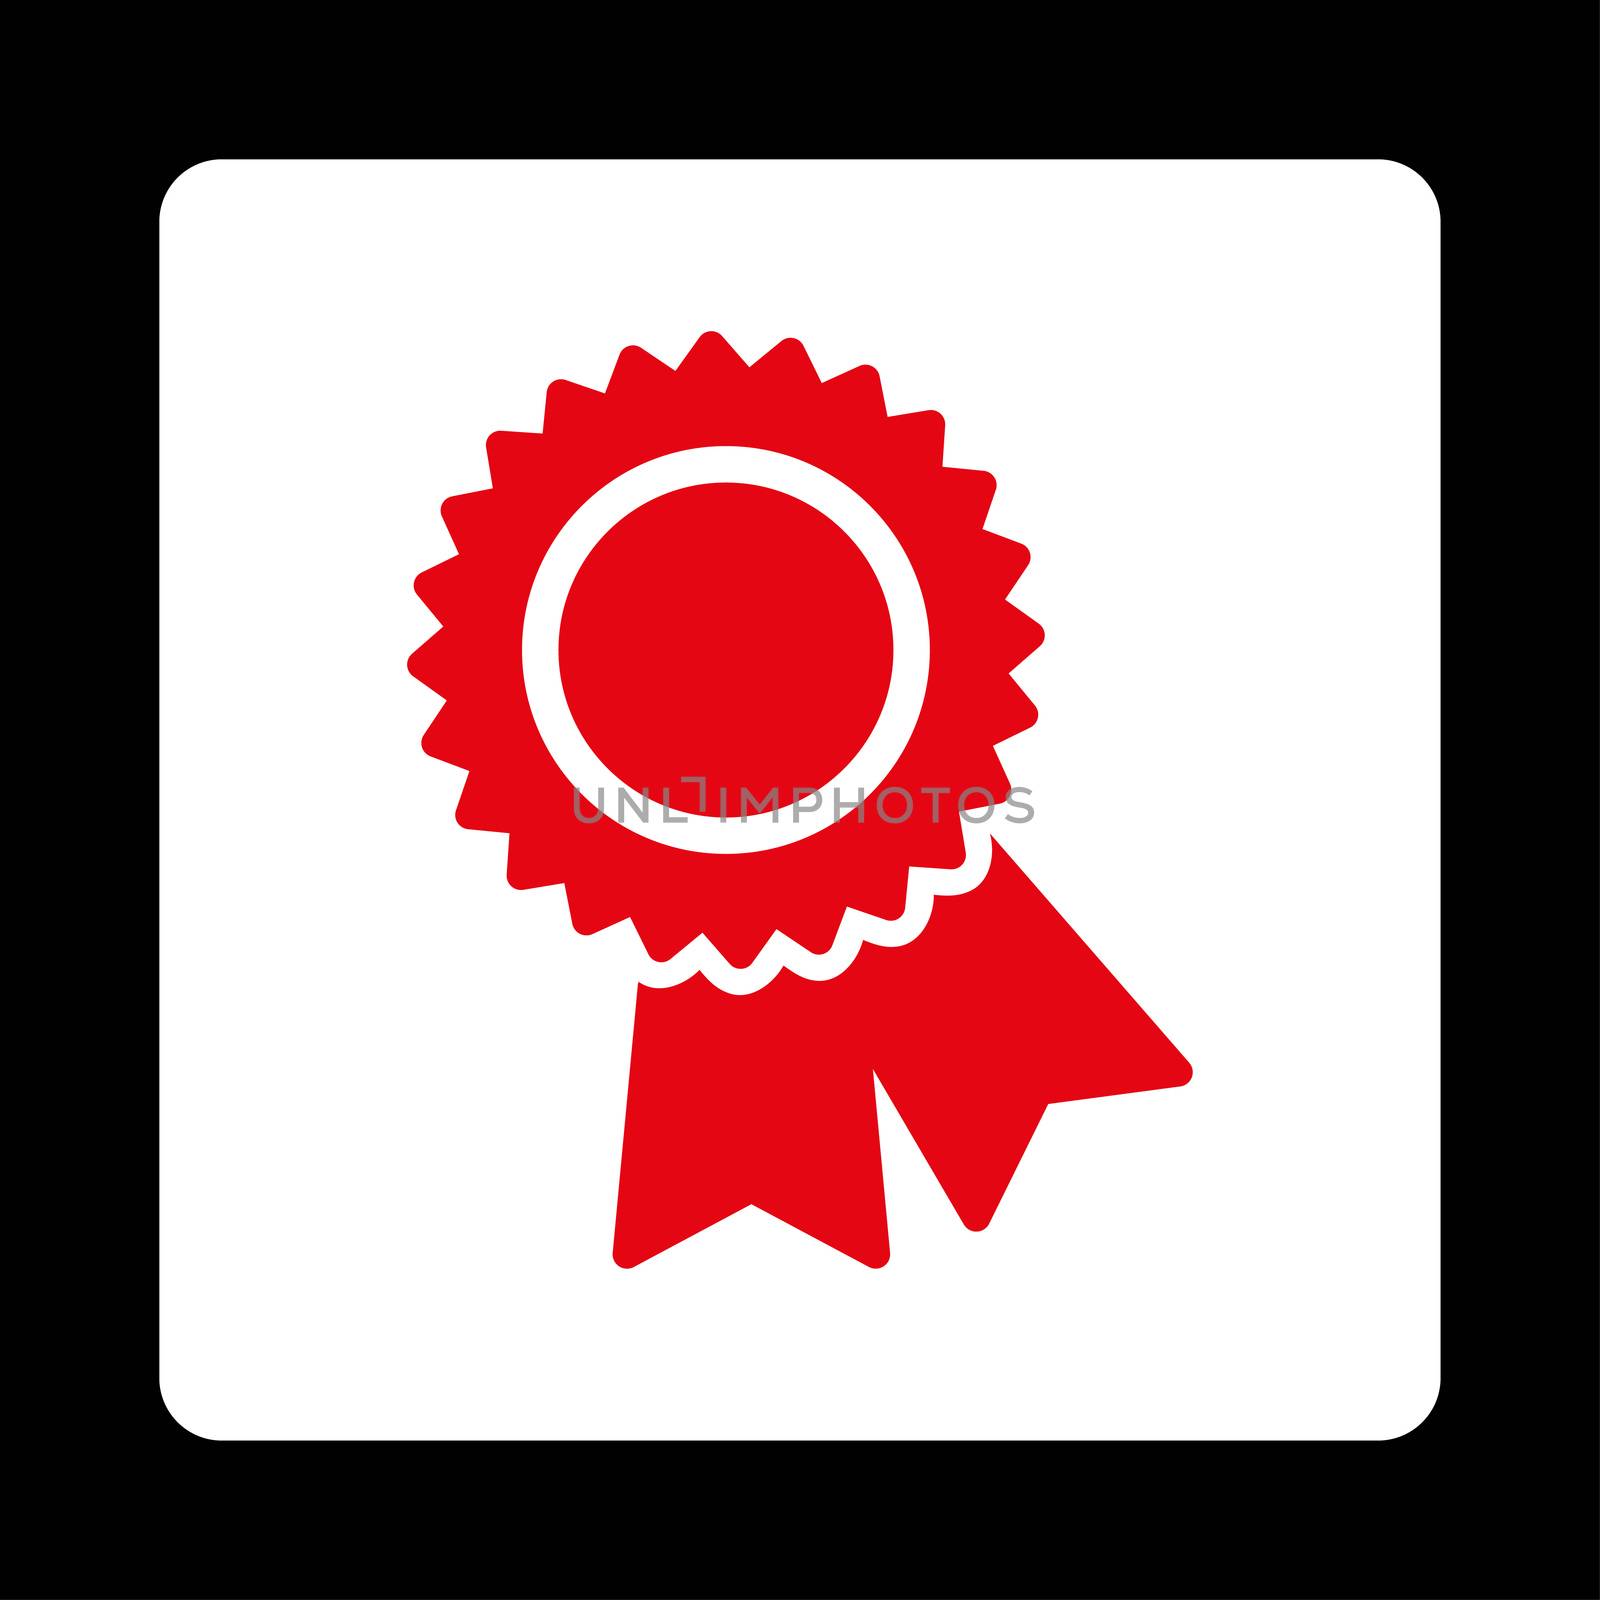 Certification icon from Award Buttons OverColor Set. Icon style is red and white colors, flat rounded square button, black background.